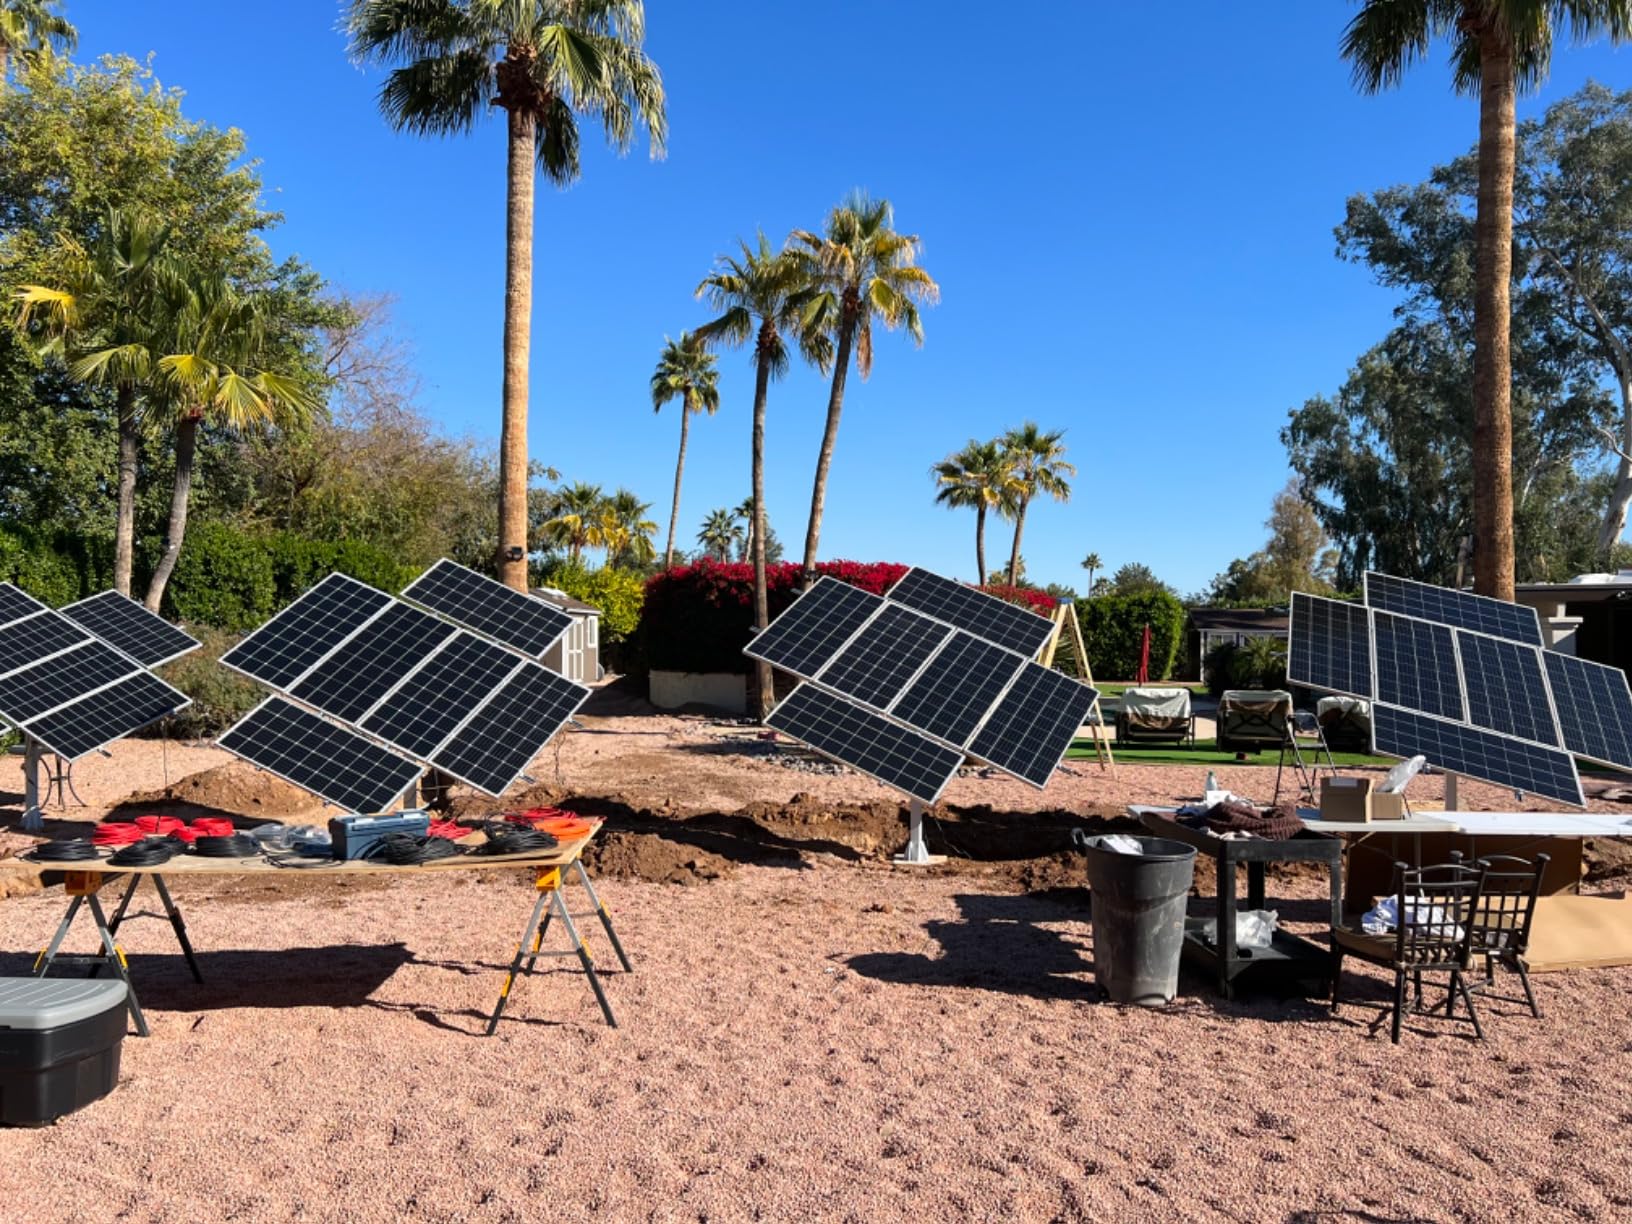 How do you get solar panels to track the sun?